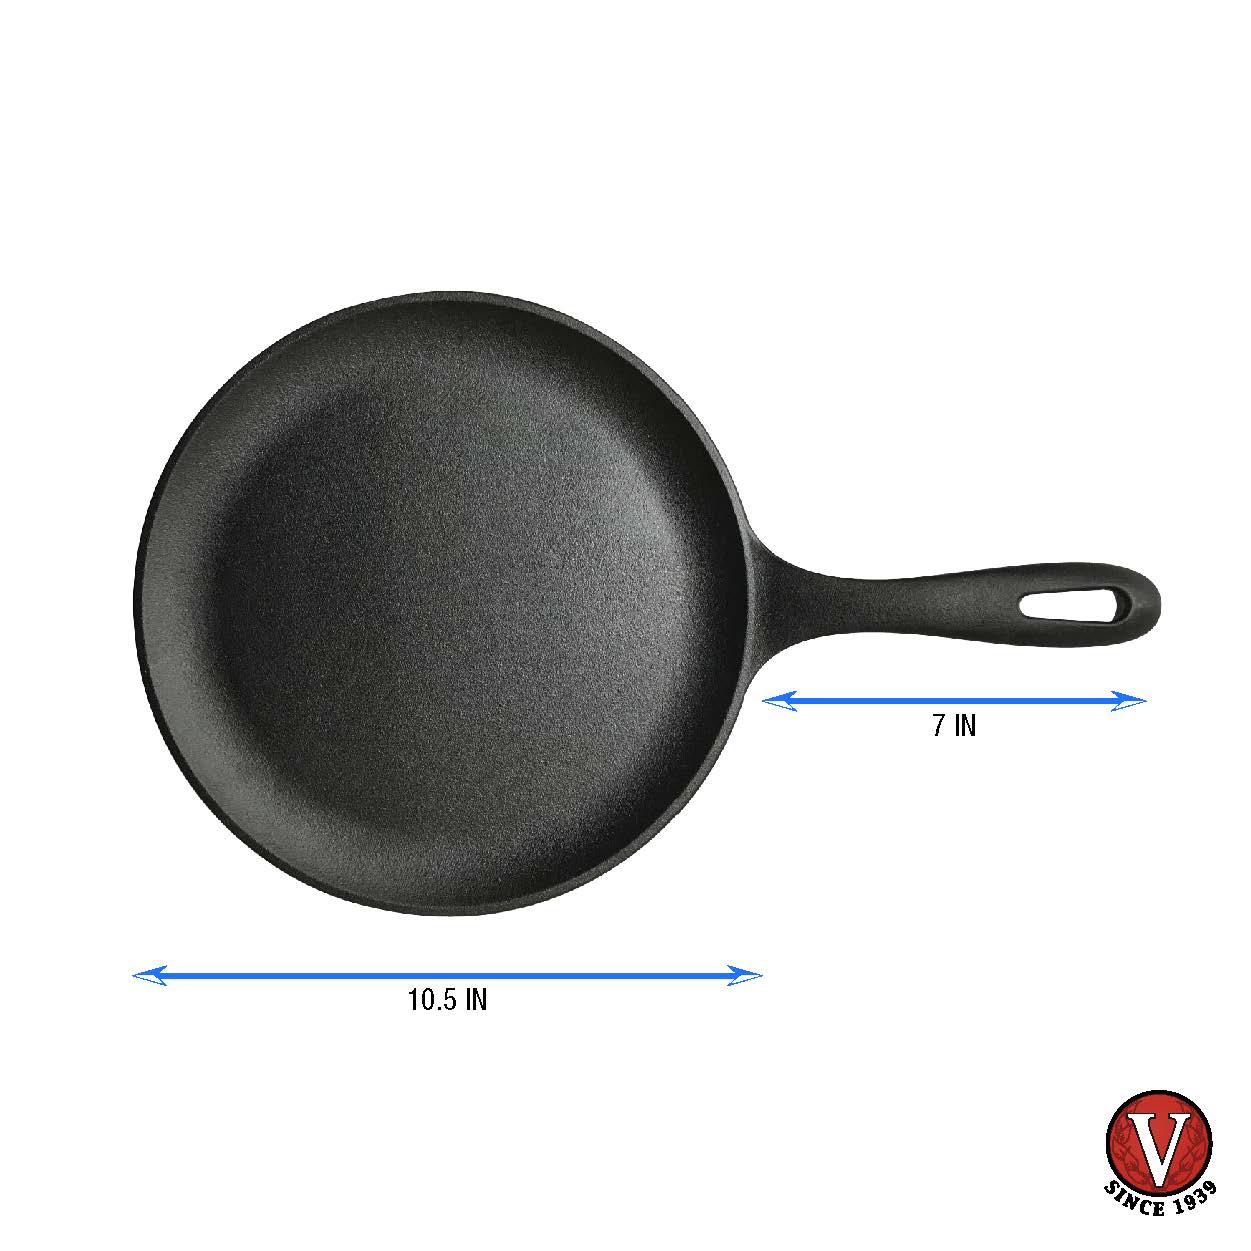 Cast Iron Griddle and Crepe Pan – Everlastly